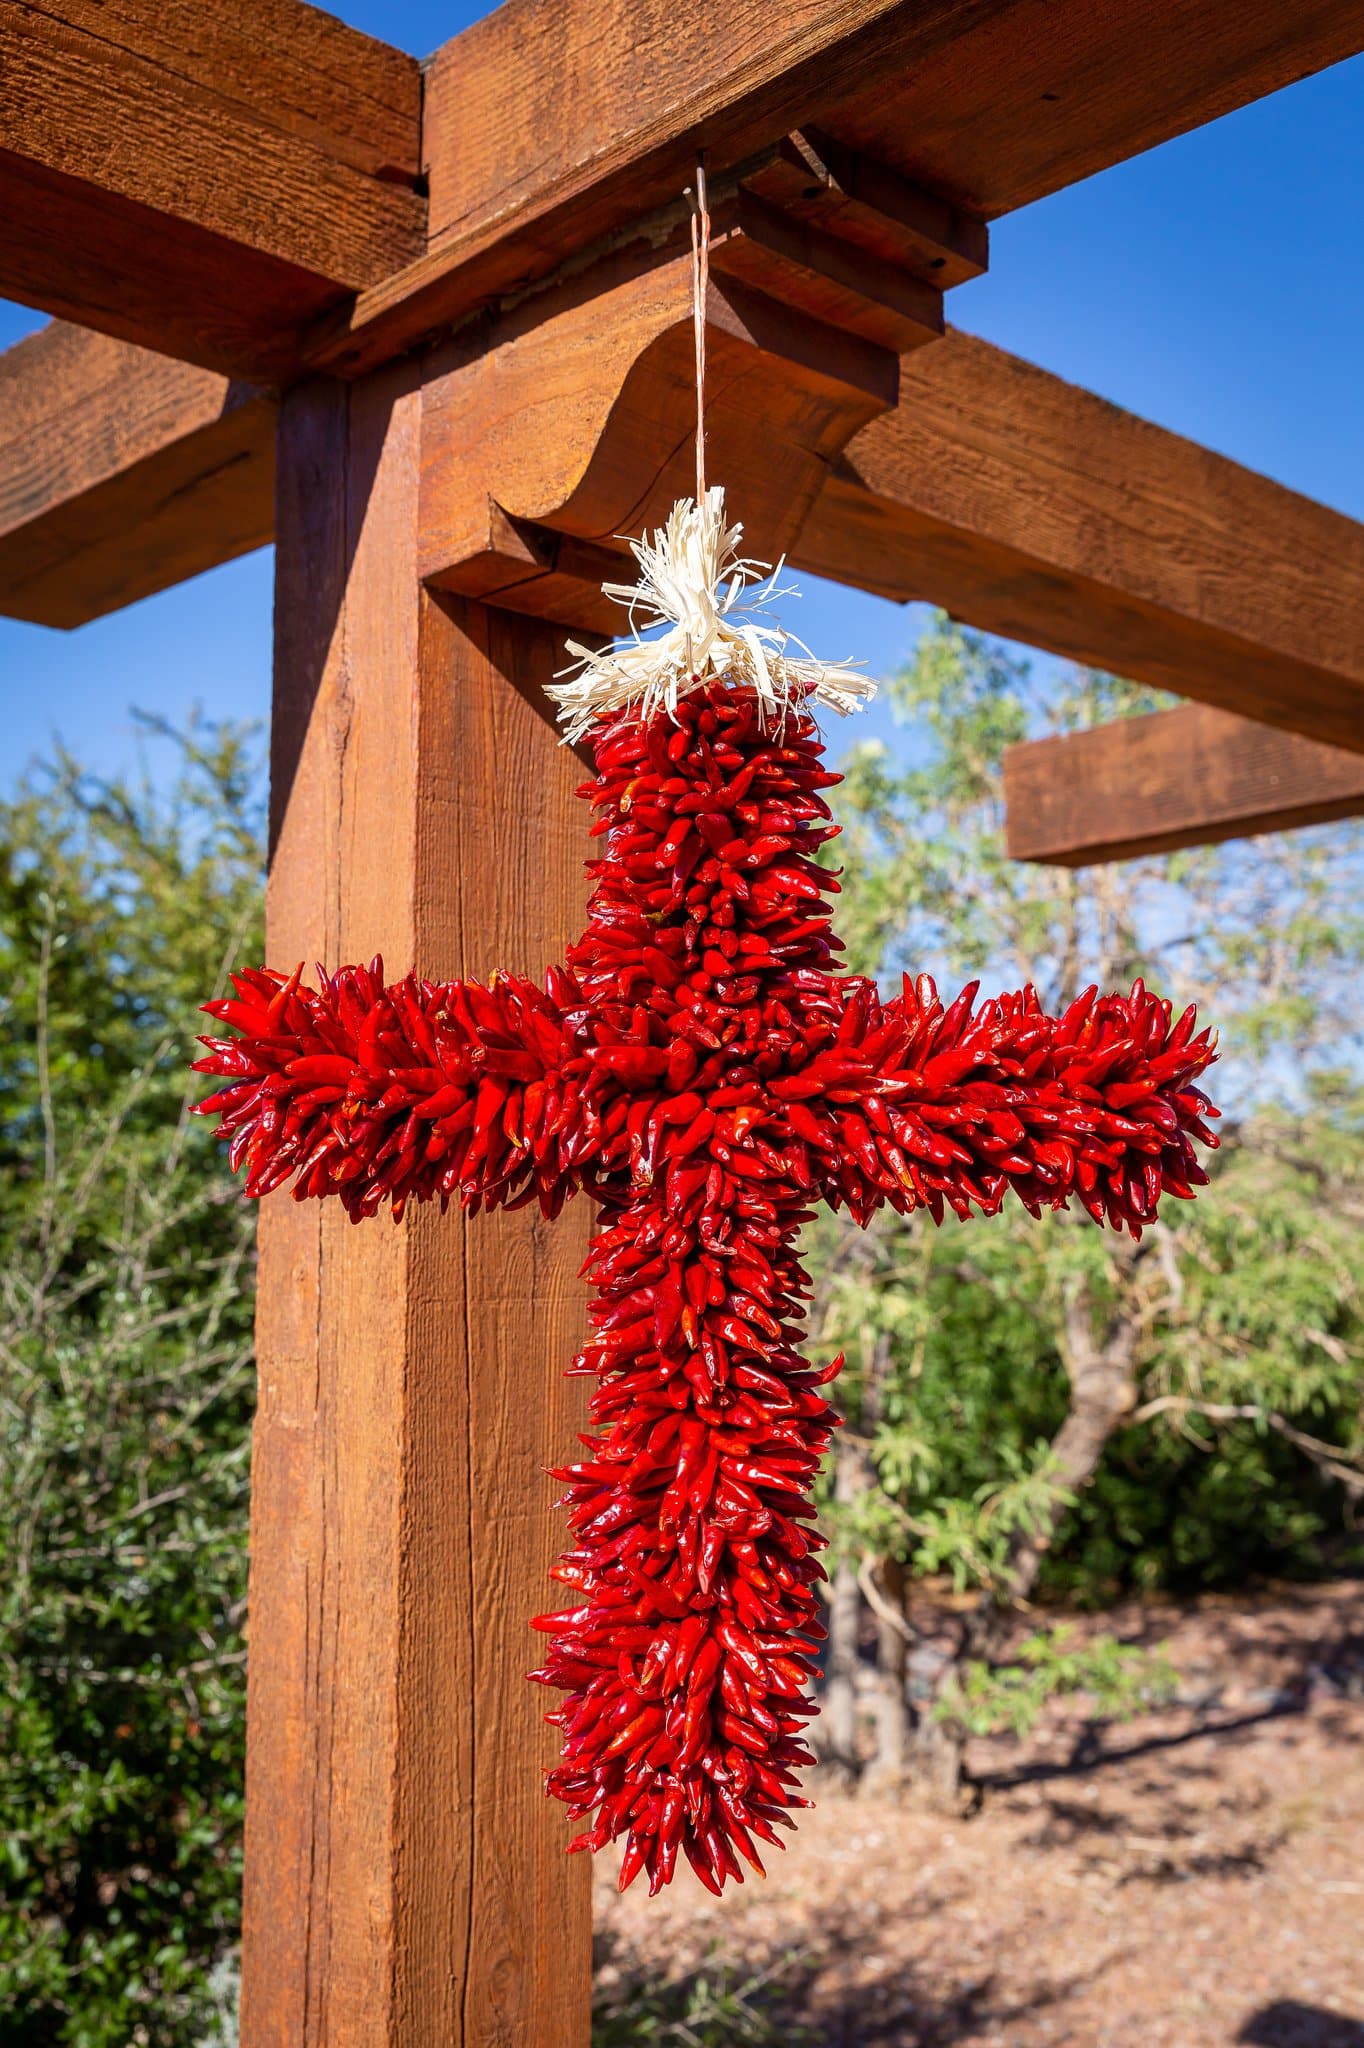 A vibrant red Chile Pequin Cross, hand-made and hanging from a wooden beam under a clear blue sky, symbolizing southwestern cultural heritage.